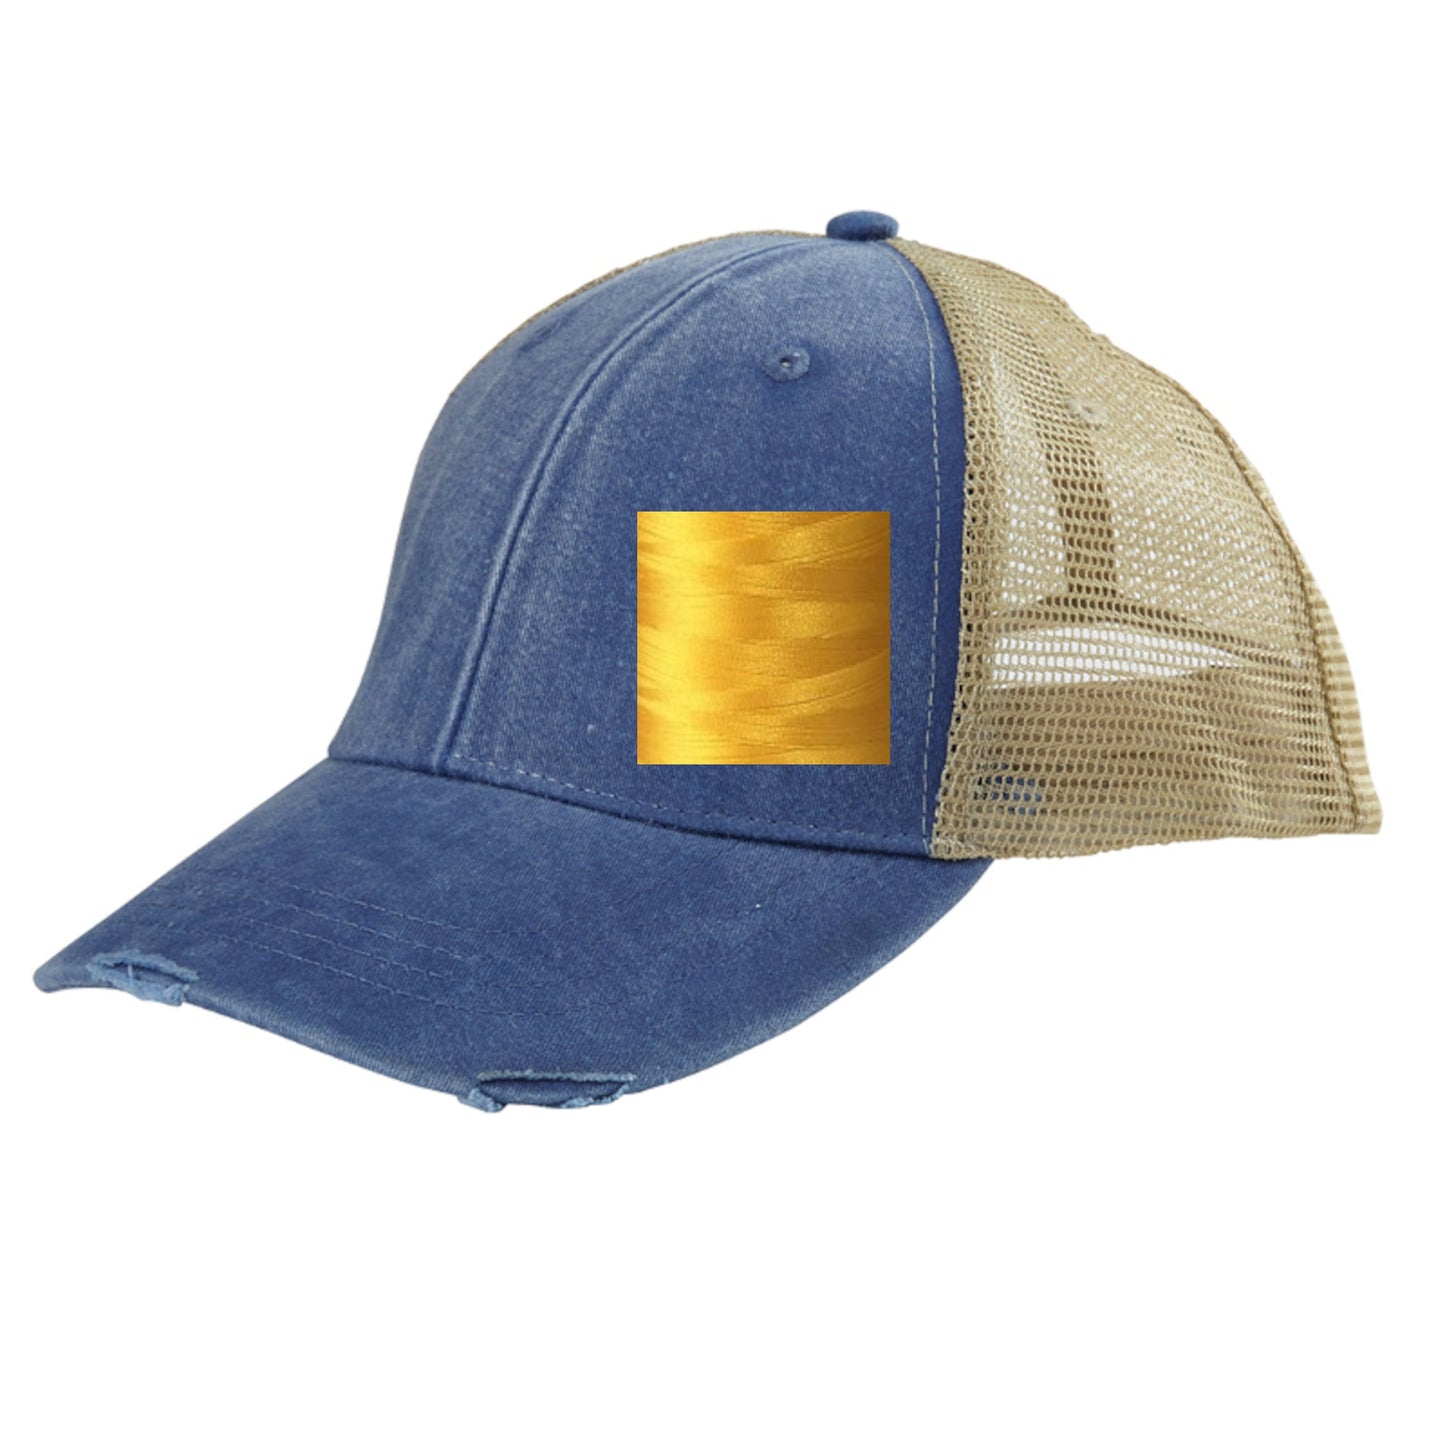 Michigan Hat | Distressed Snapback Trucker  | state cap | many color choices